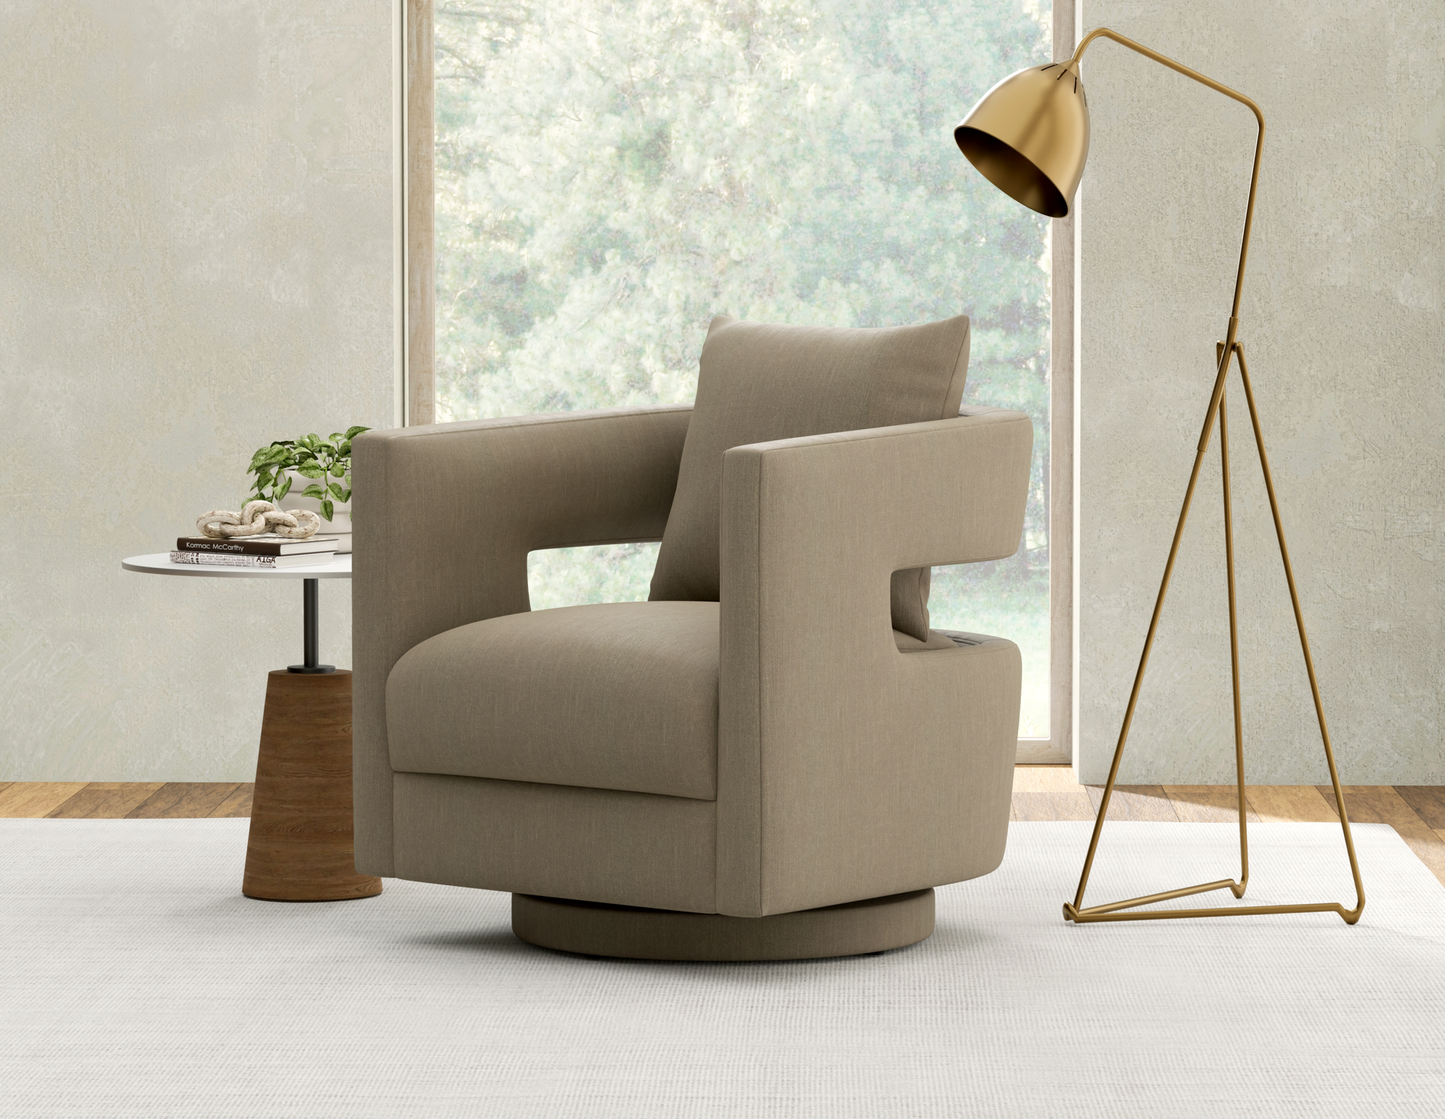 Jude Accent Chair